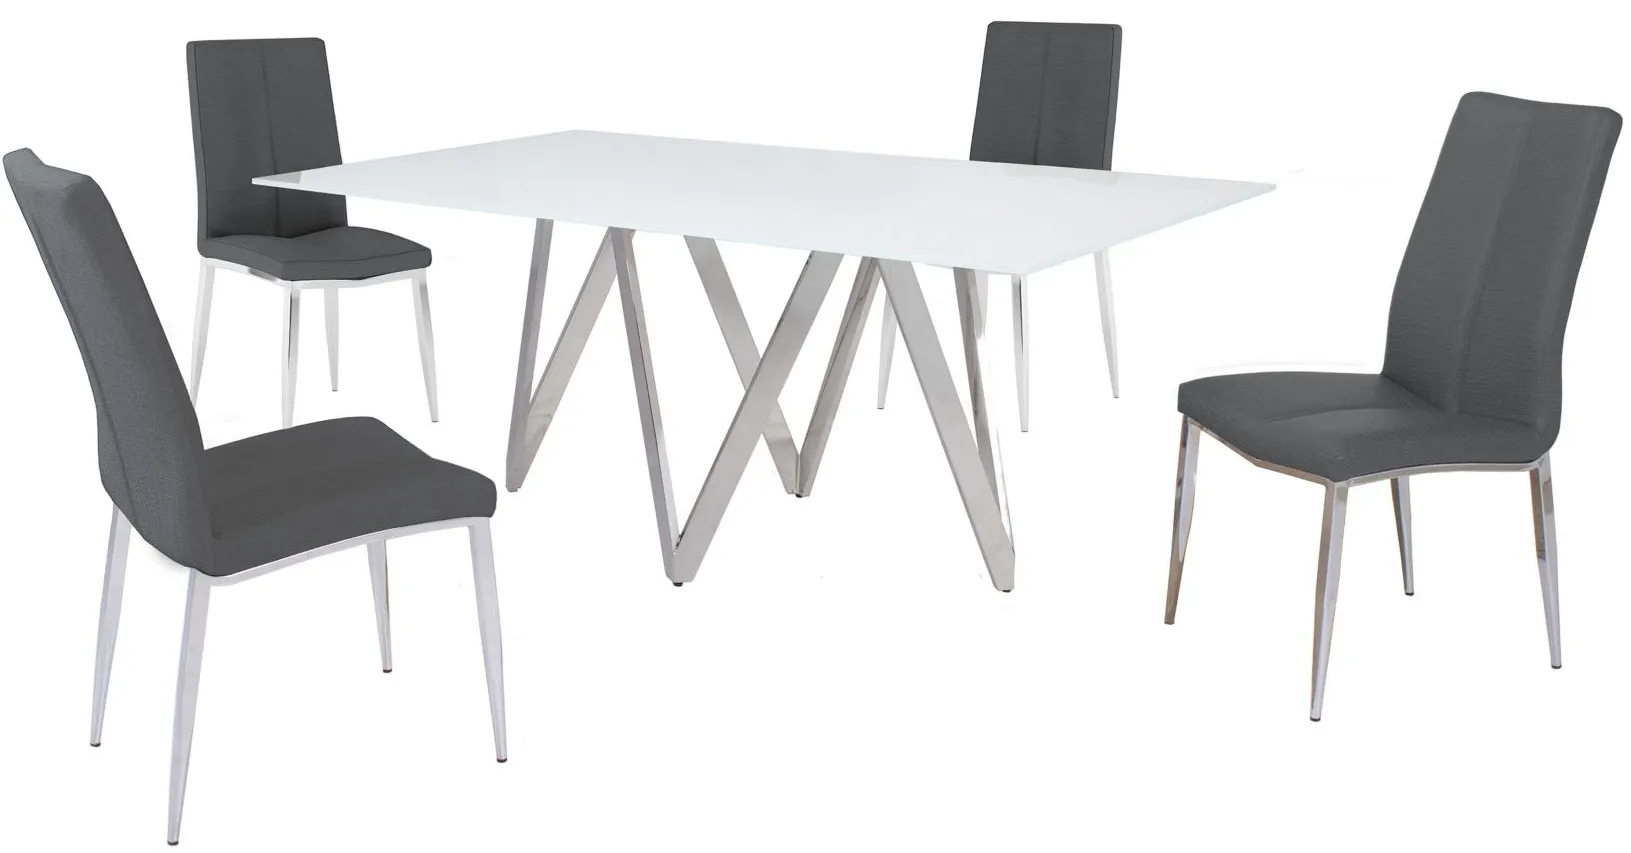 Abigail 5-pc. Dining Set in Ash by Chintaly Imports